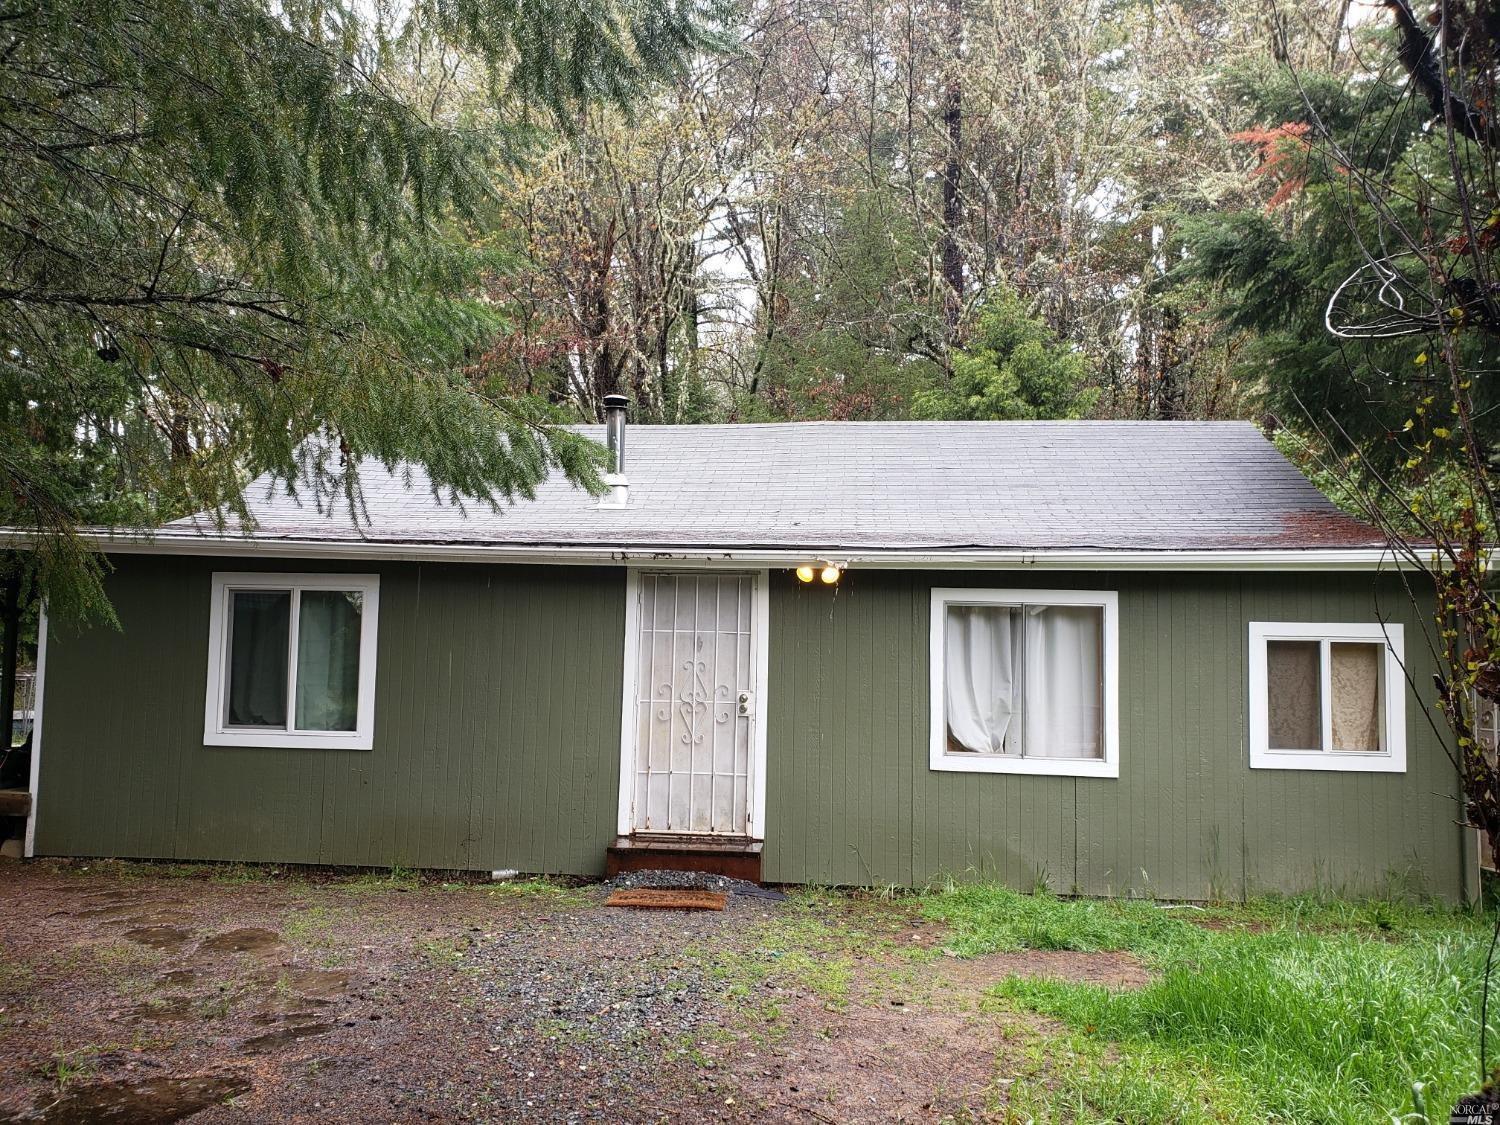 Photo of 701 Branscomb Rd in Laytonville, CA